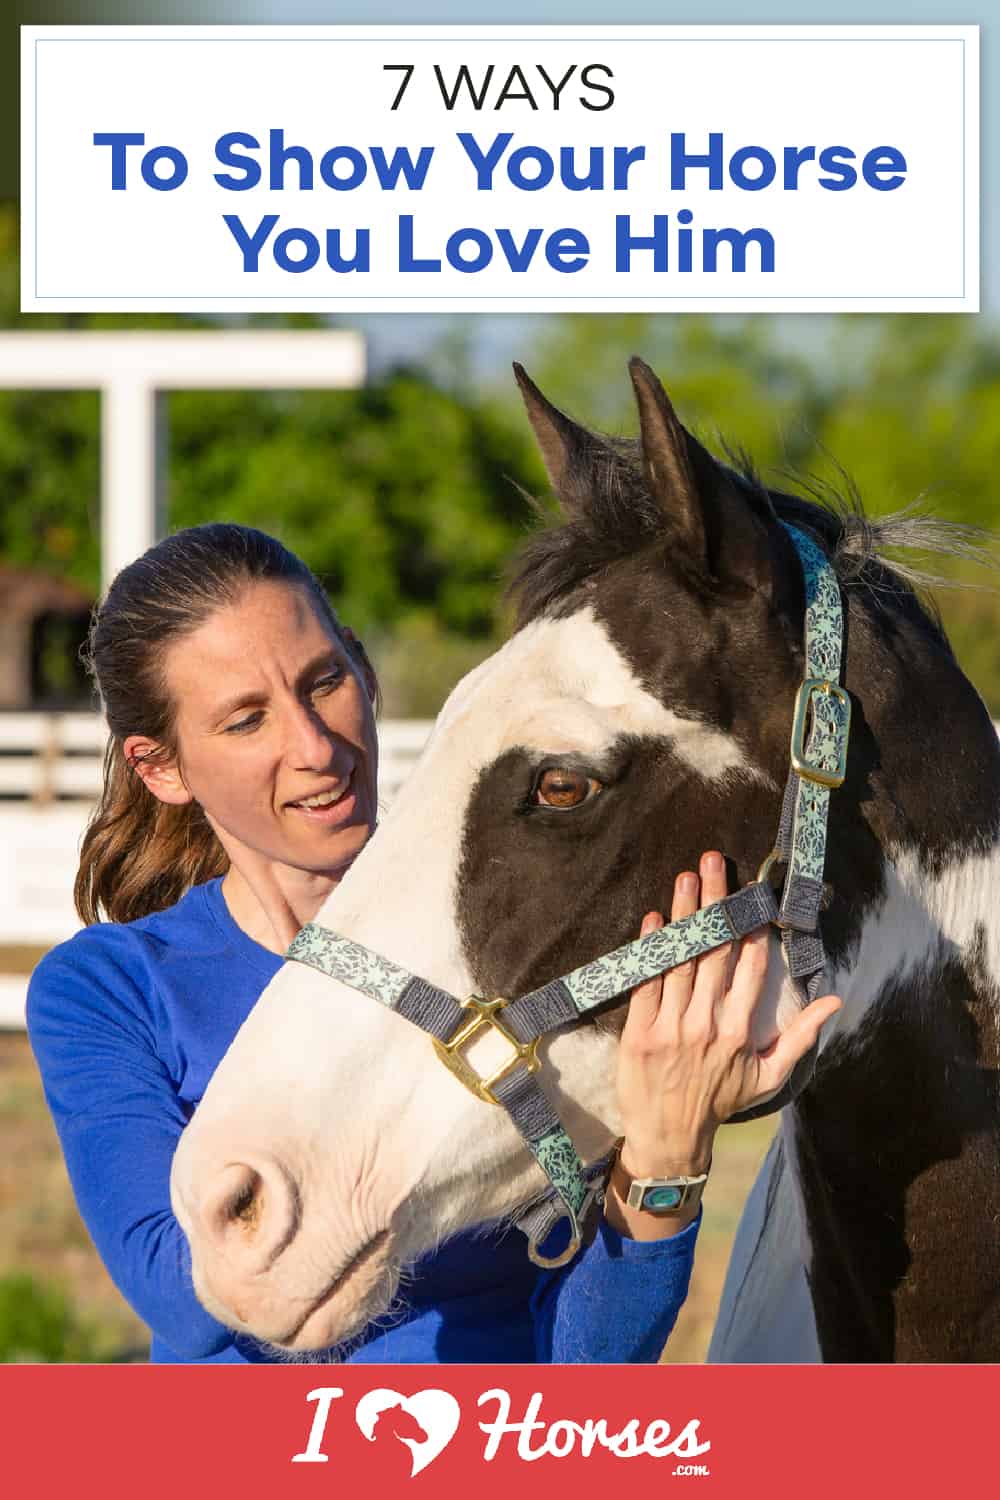 7 Ways To Show Your Horse You Love Him-01